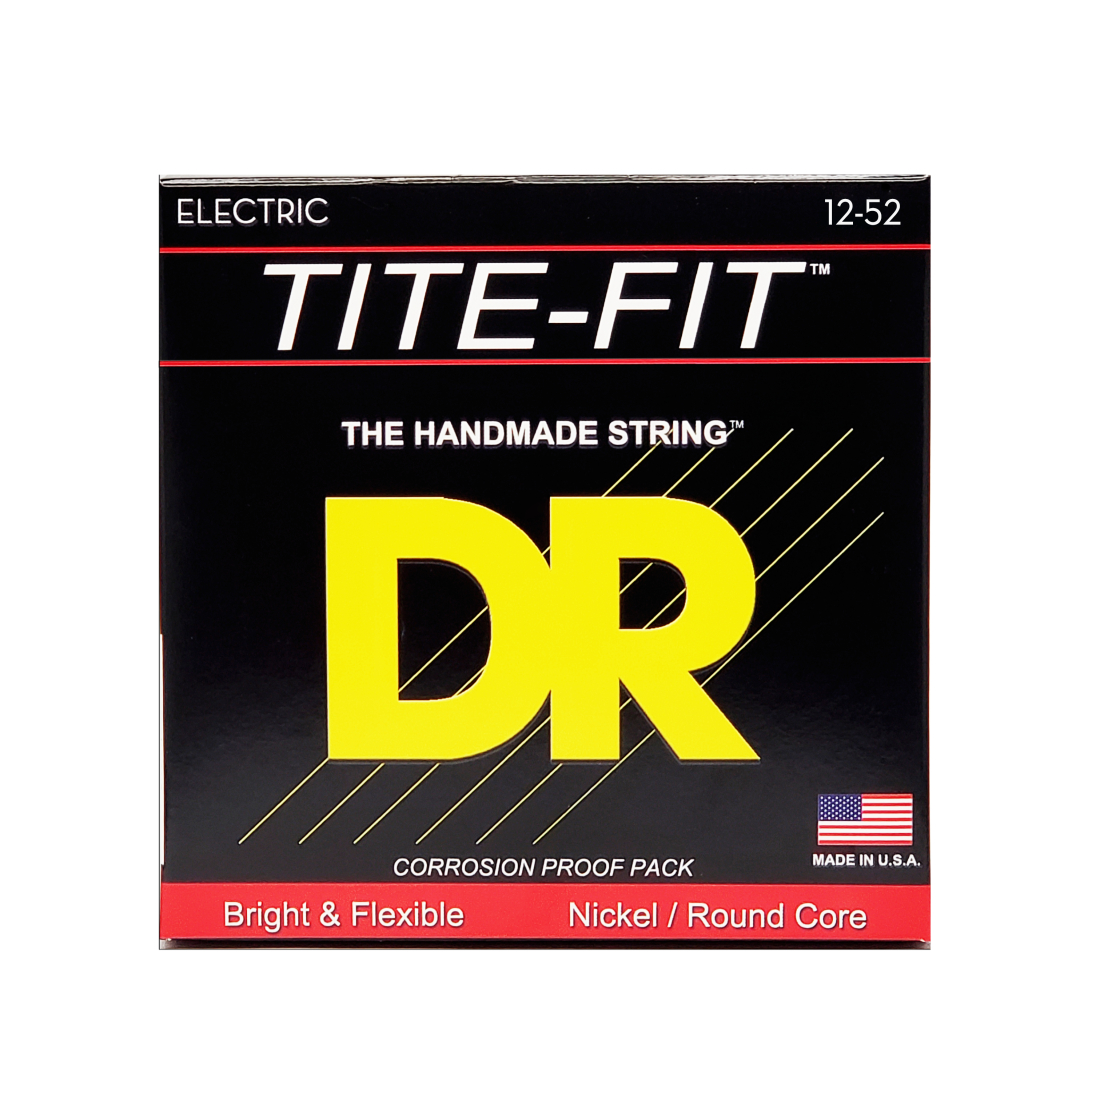 Tite-Fit Jazz Roundwound Nickel-Plated Electric Strings 12-52